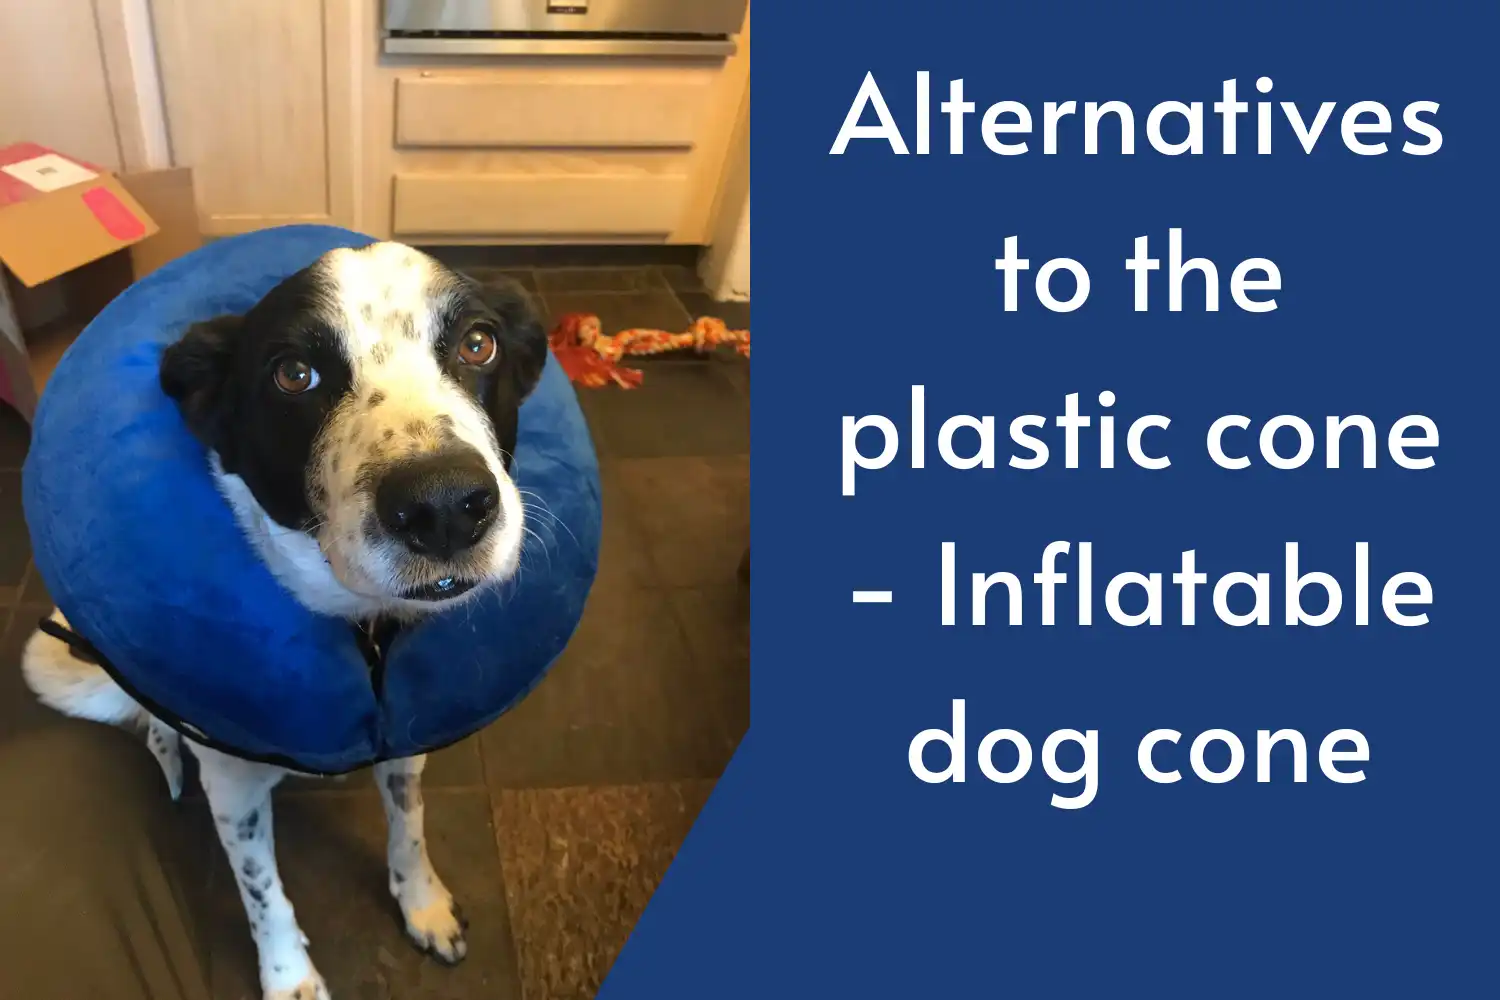 How Long Does Dog Wear Cone after Neuter? - Alternatives to the plastic cone - Inflatable dog cone